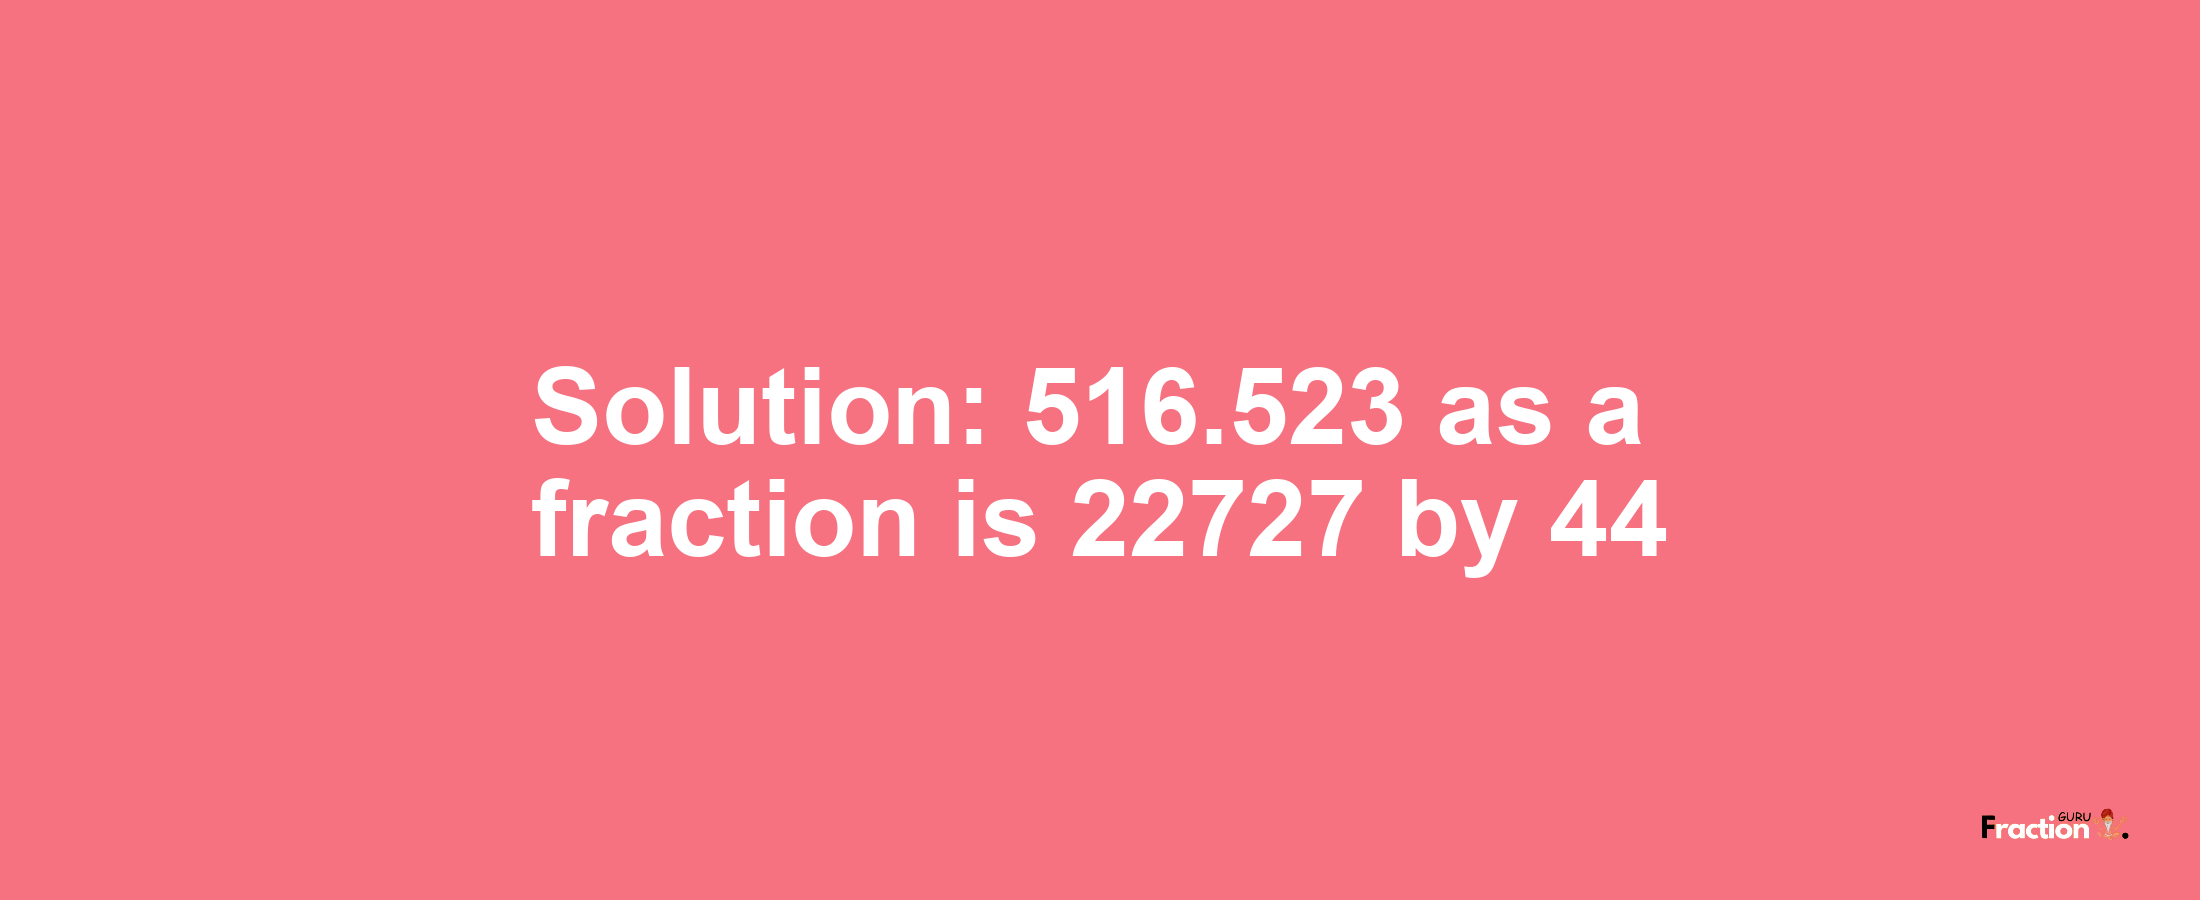 Solution:516.523 as a fraction is 22727/44